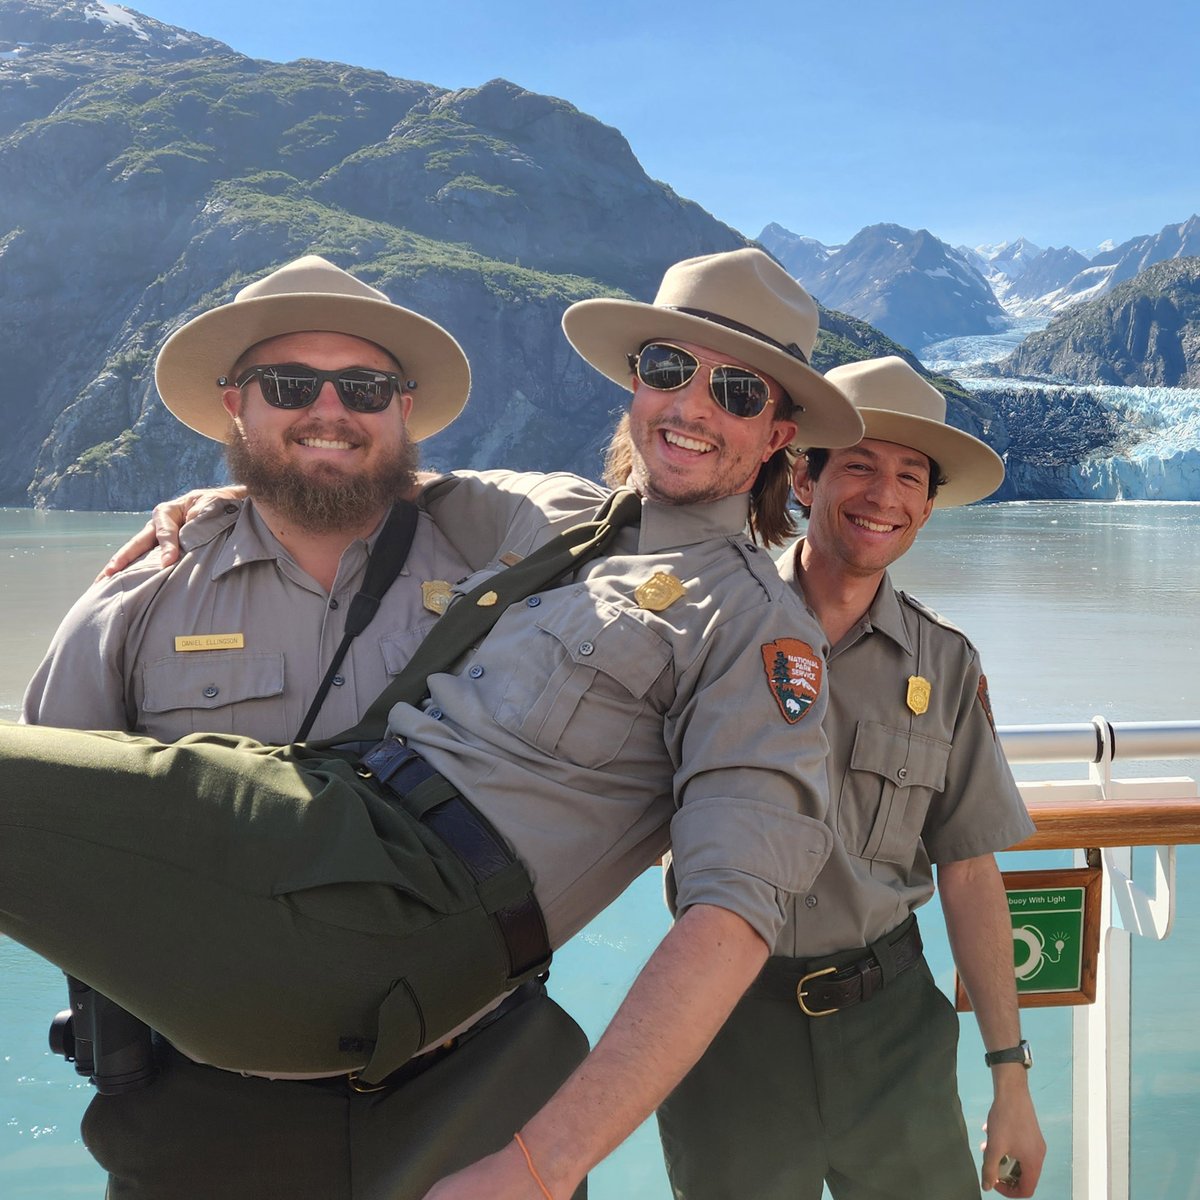 Must be the hats... the National Park Service is hiring park rangers for next summer's season! Join our team of experienced interpretation rangers in Glacier Bay and help inspire thousands of visitors during their trip of a lifetime. Apply on USAJobs.gov today through